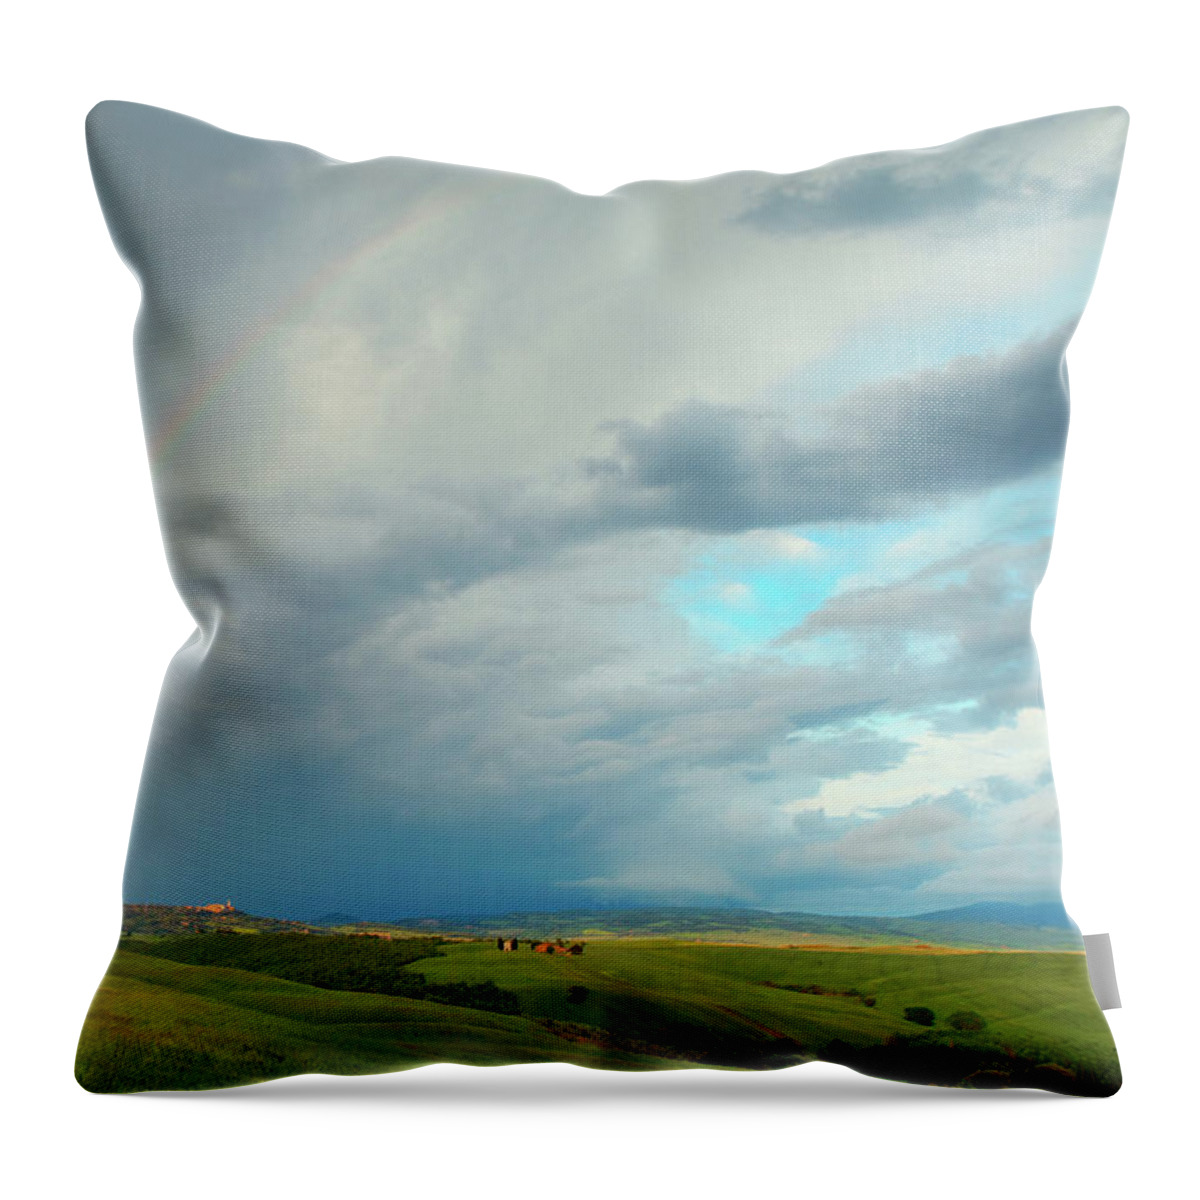 Scenics Throw Pillow featuring the photograph Rainbow Over Tuscany by Mammuth